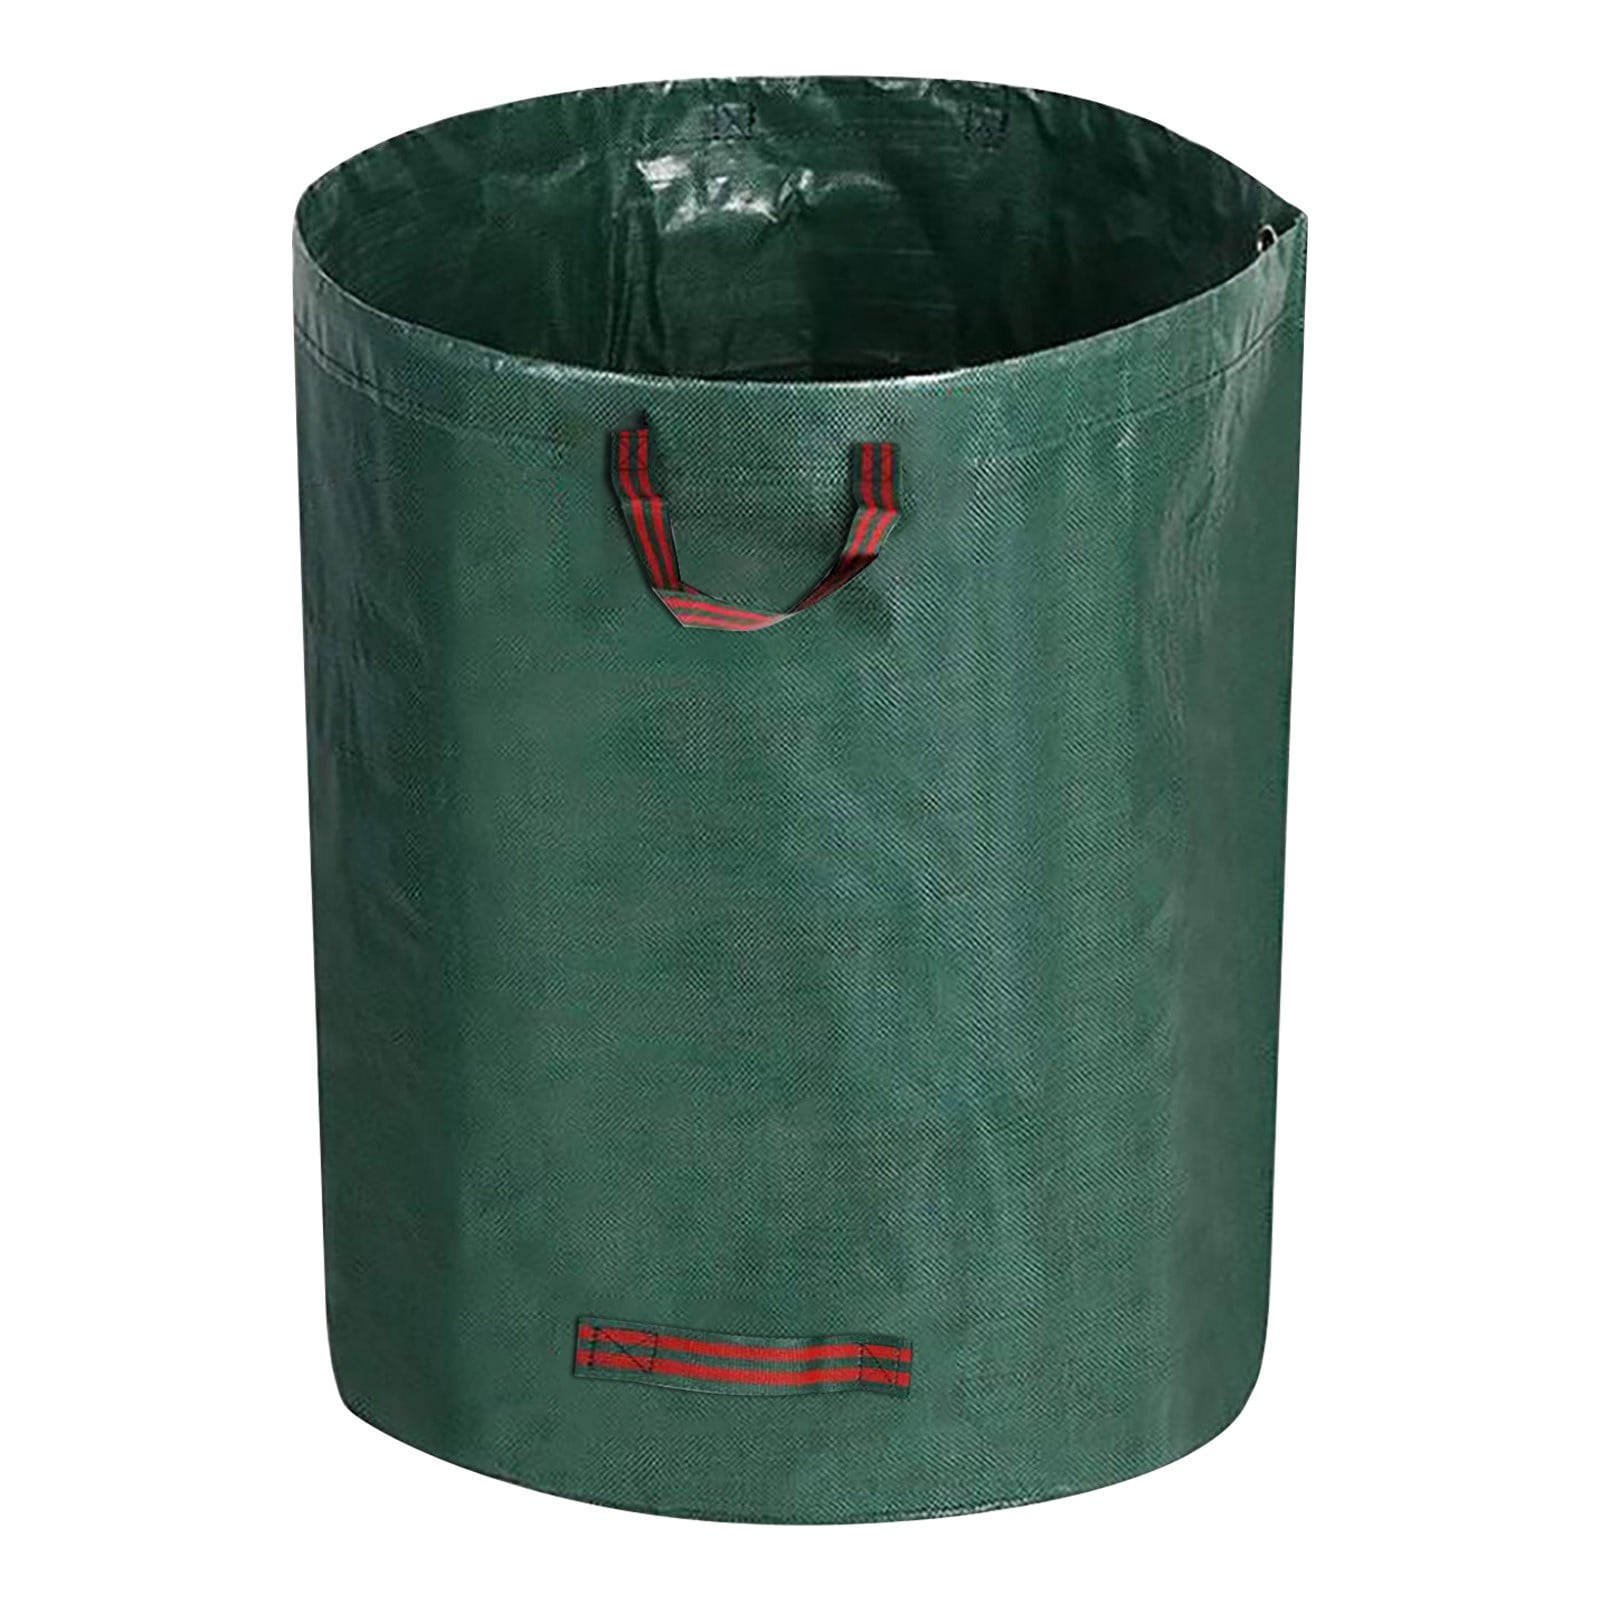 Duokon Lawn Garden Bags,Collapsible Compost Bag Reusable Yard Waste Bag Reusable Yard Waste Bag for Leaf Trash Containers Plant Clippings Bag 4580 